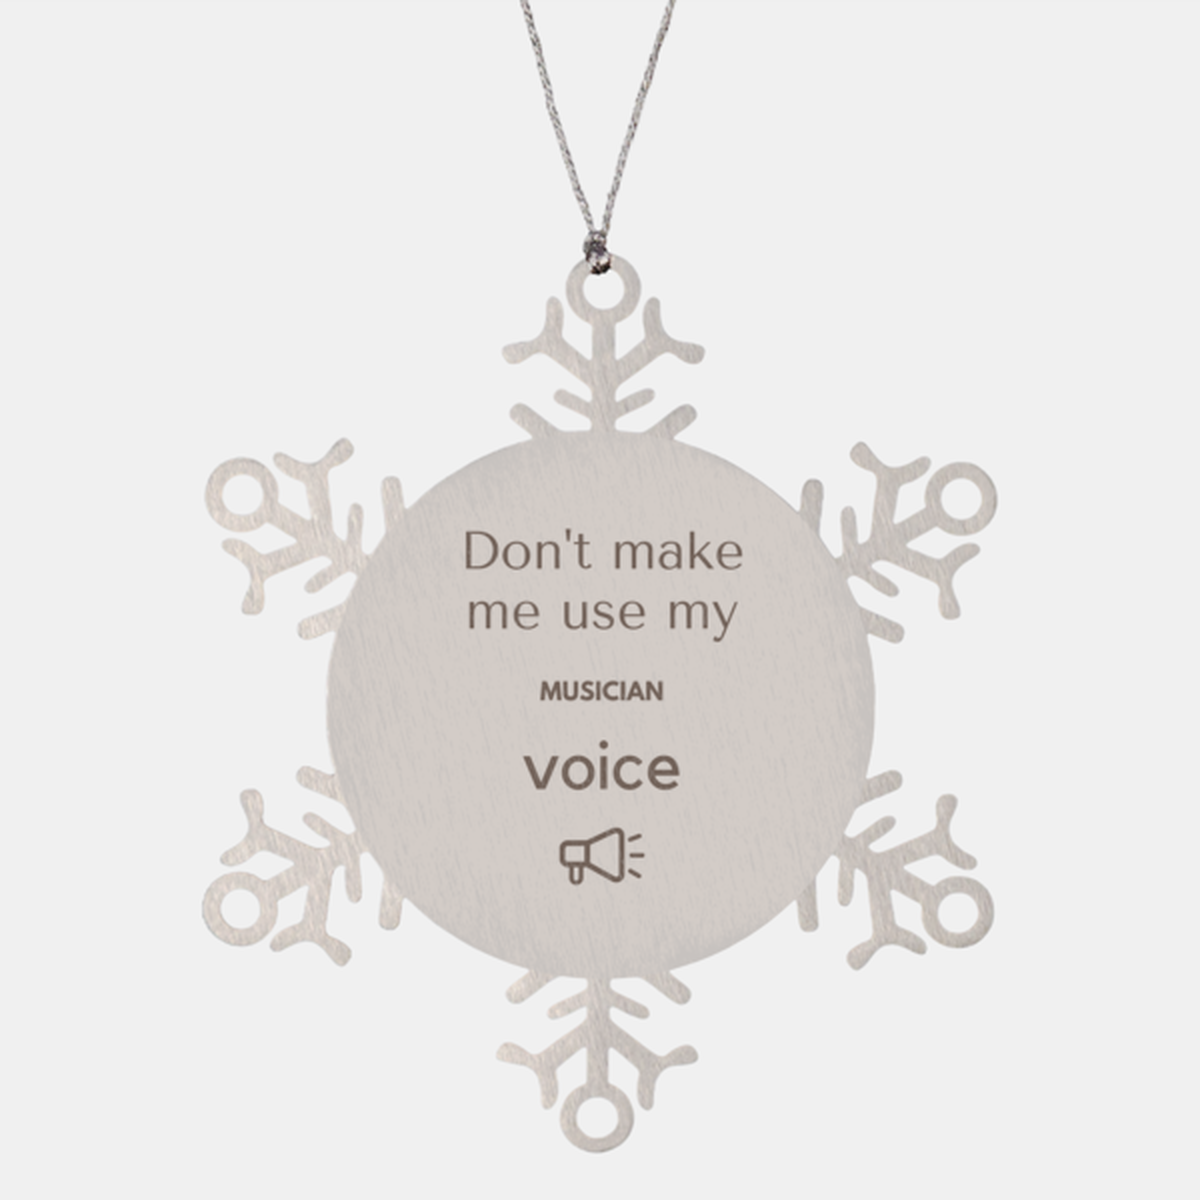 Don't make me use my Musician voice, Sarcasm Musician Ornament Gifts, Christmas Musician Snowflake Ornament Unique Gifts For Musician Coworkers, Men, Women, Colleague, Friends